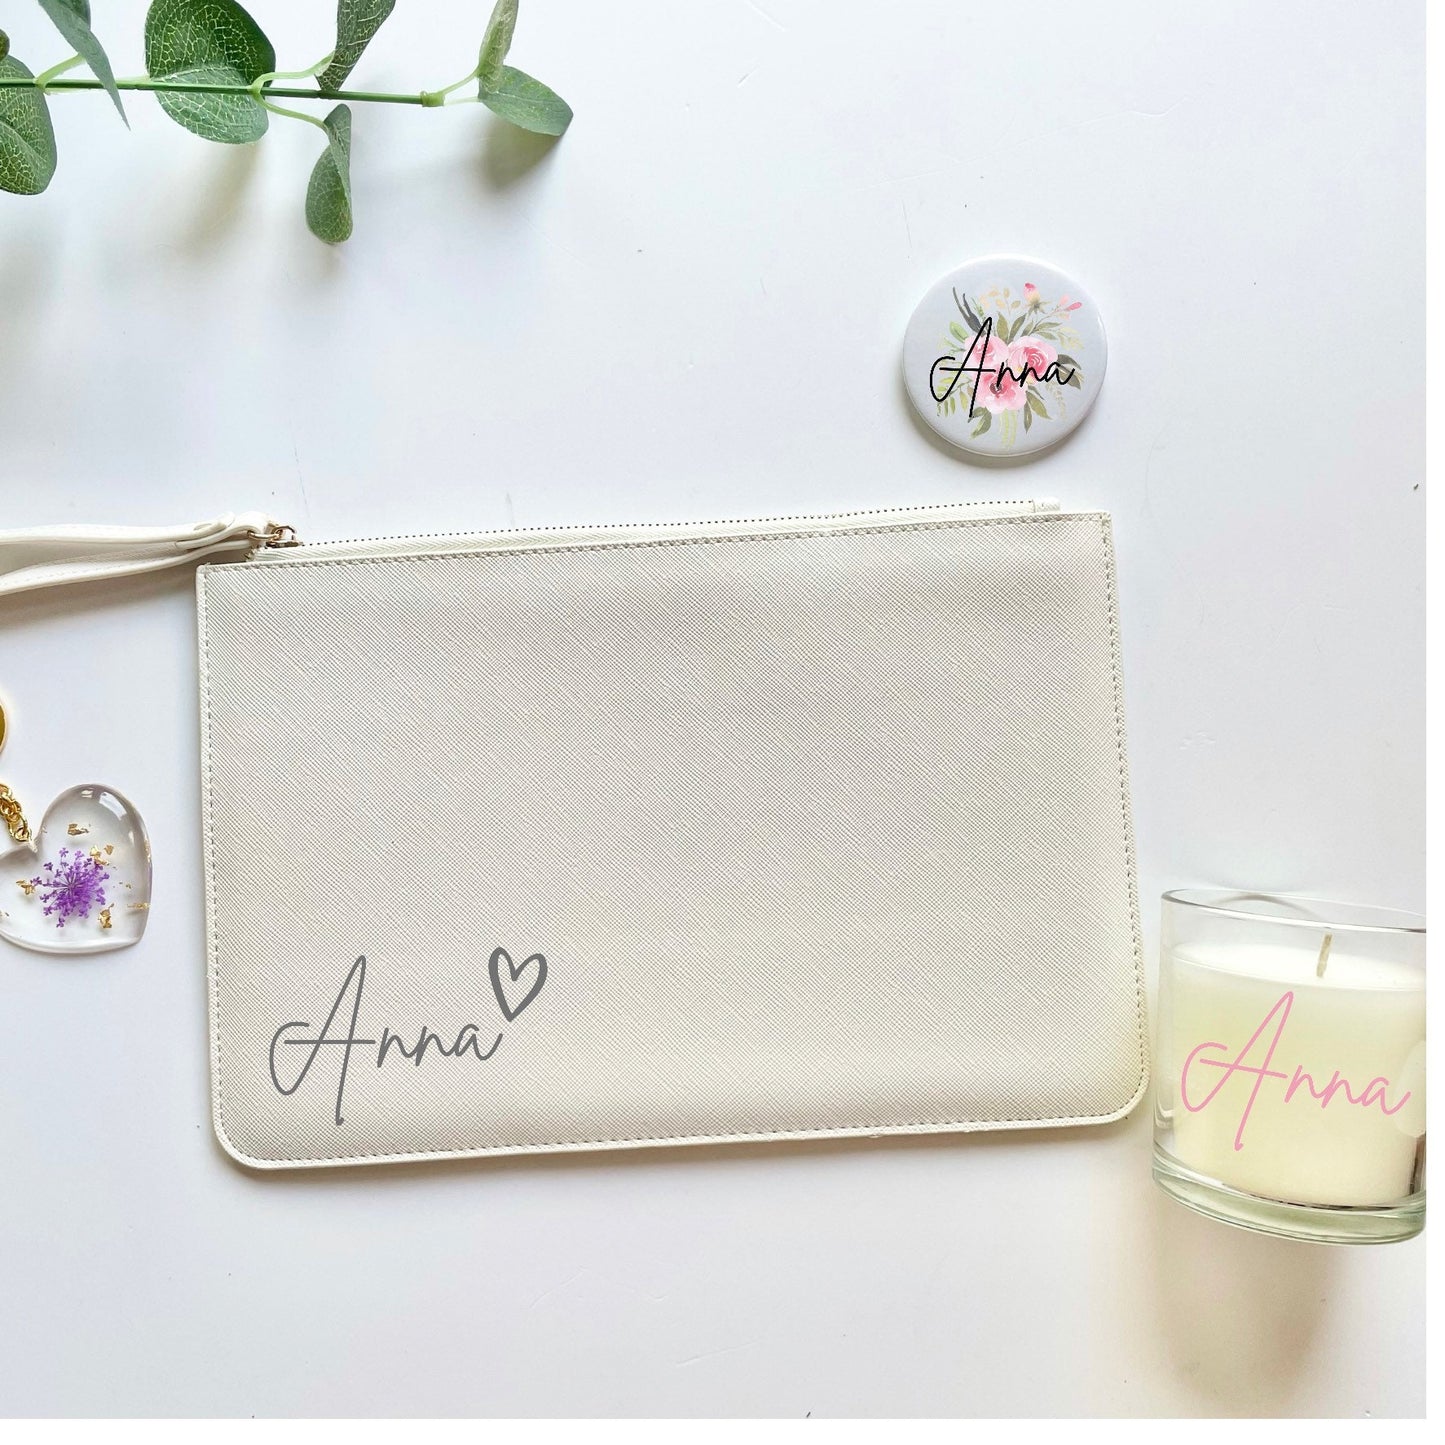 Personalised gift set for her, Mother’s Day gift set, mum gifts, clutch bag, candle, floral design compact mirror, gold leaf resin keyring